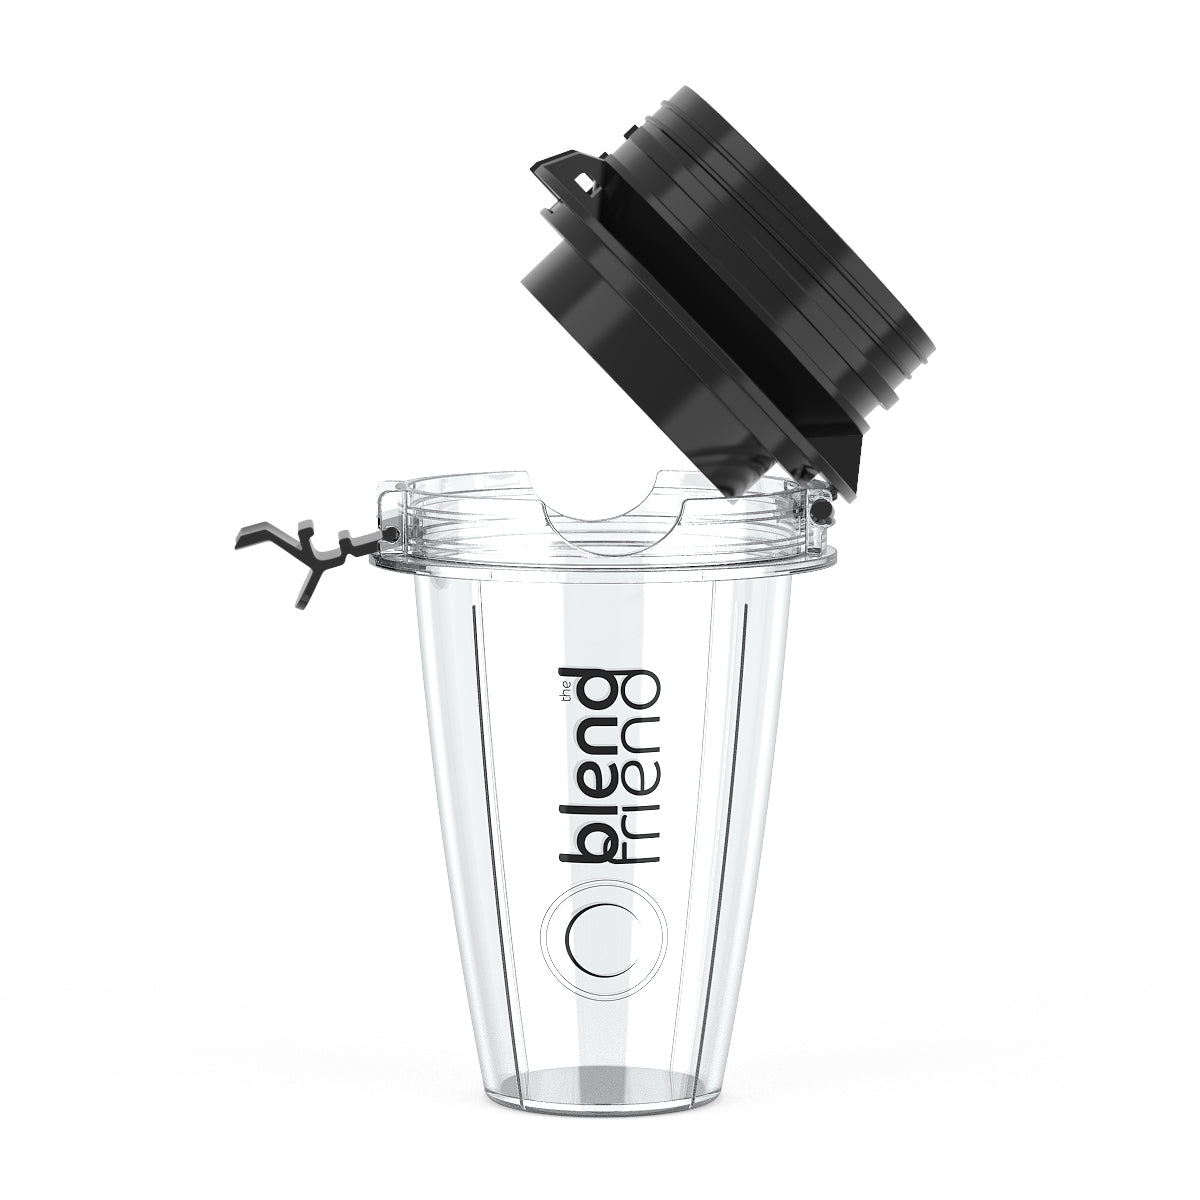 Disposable cup attachment for Ninja Blenders